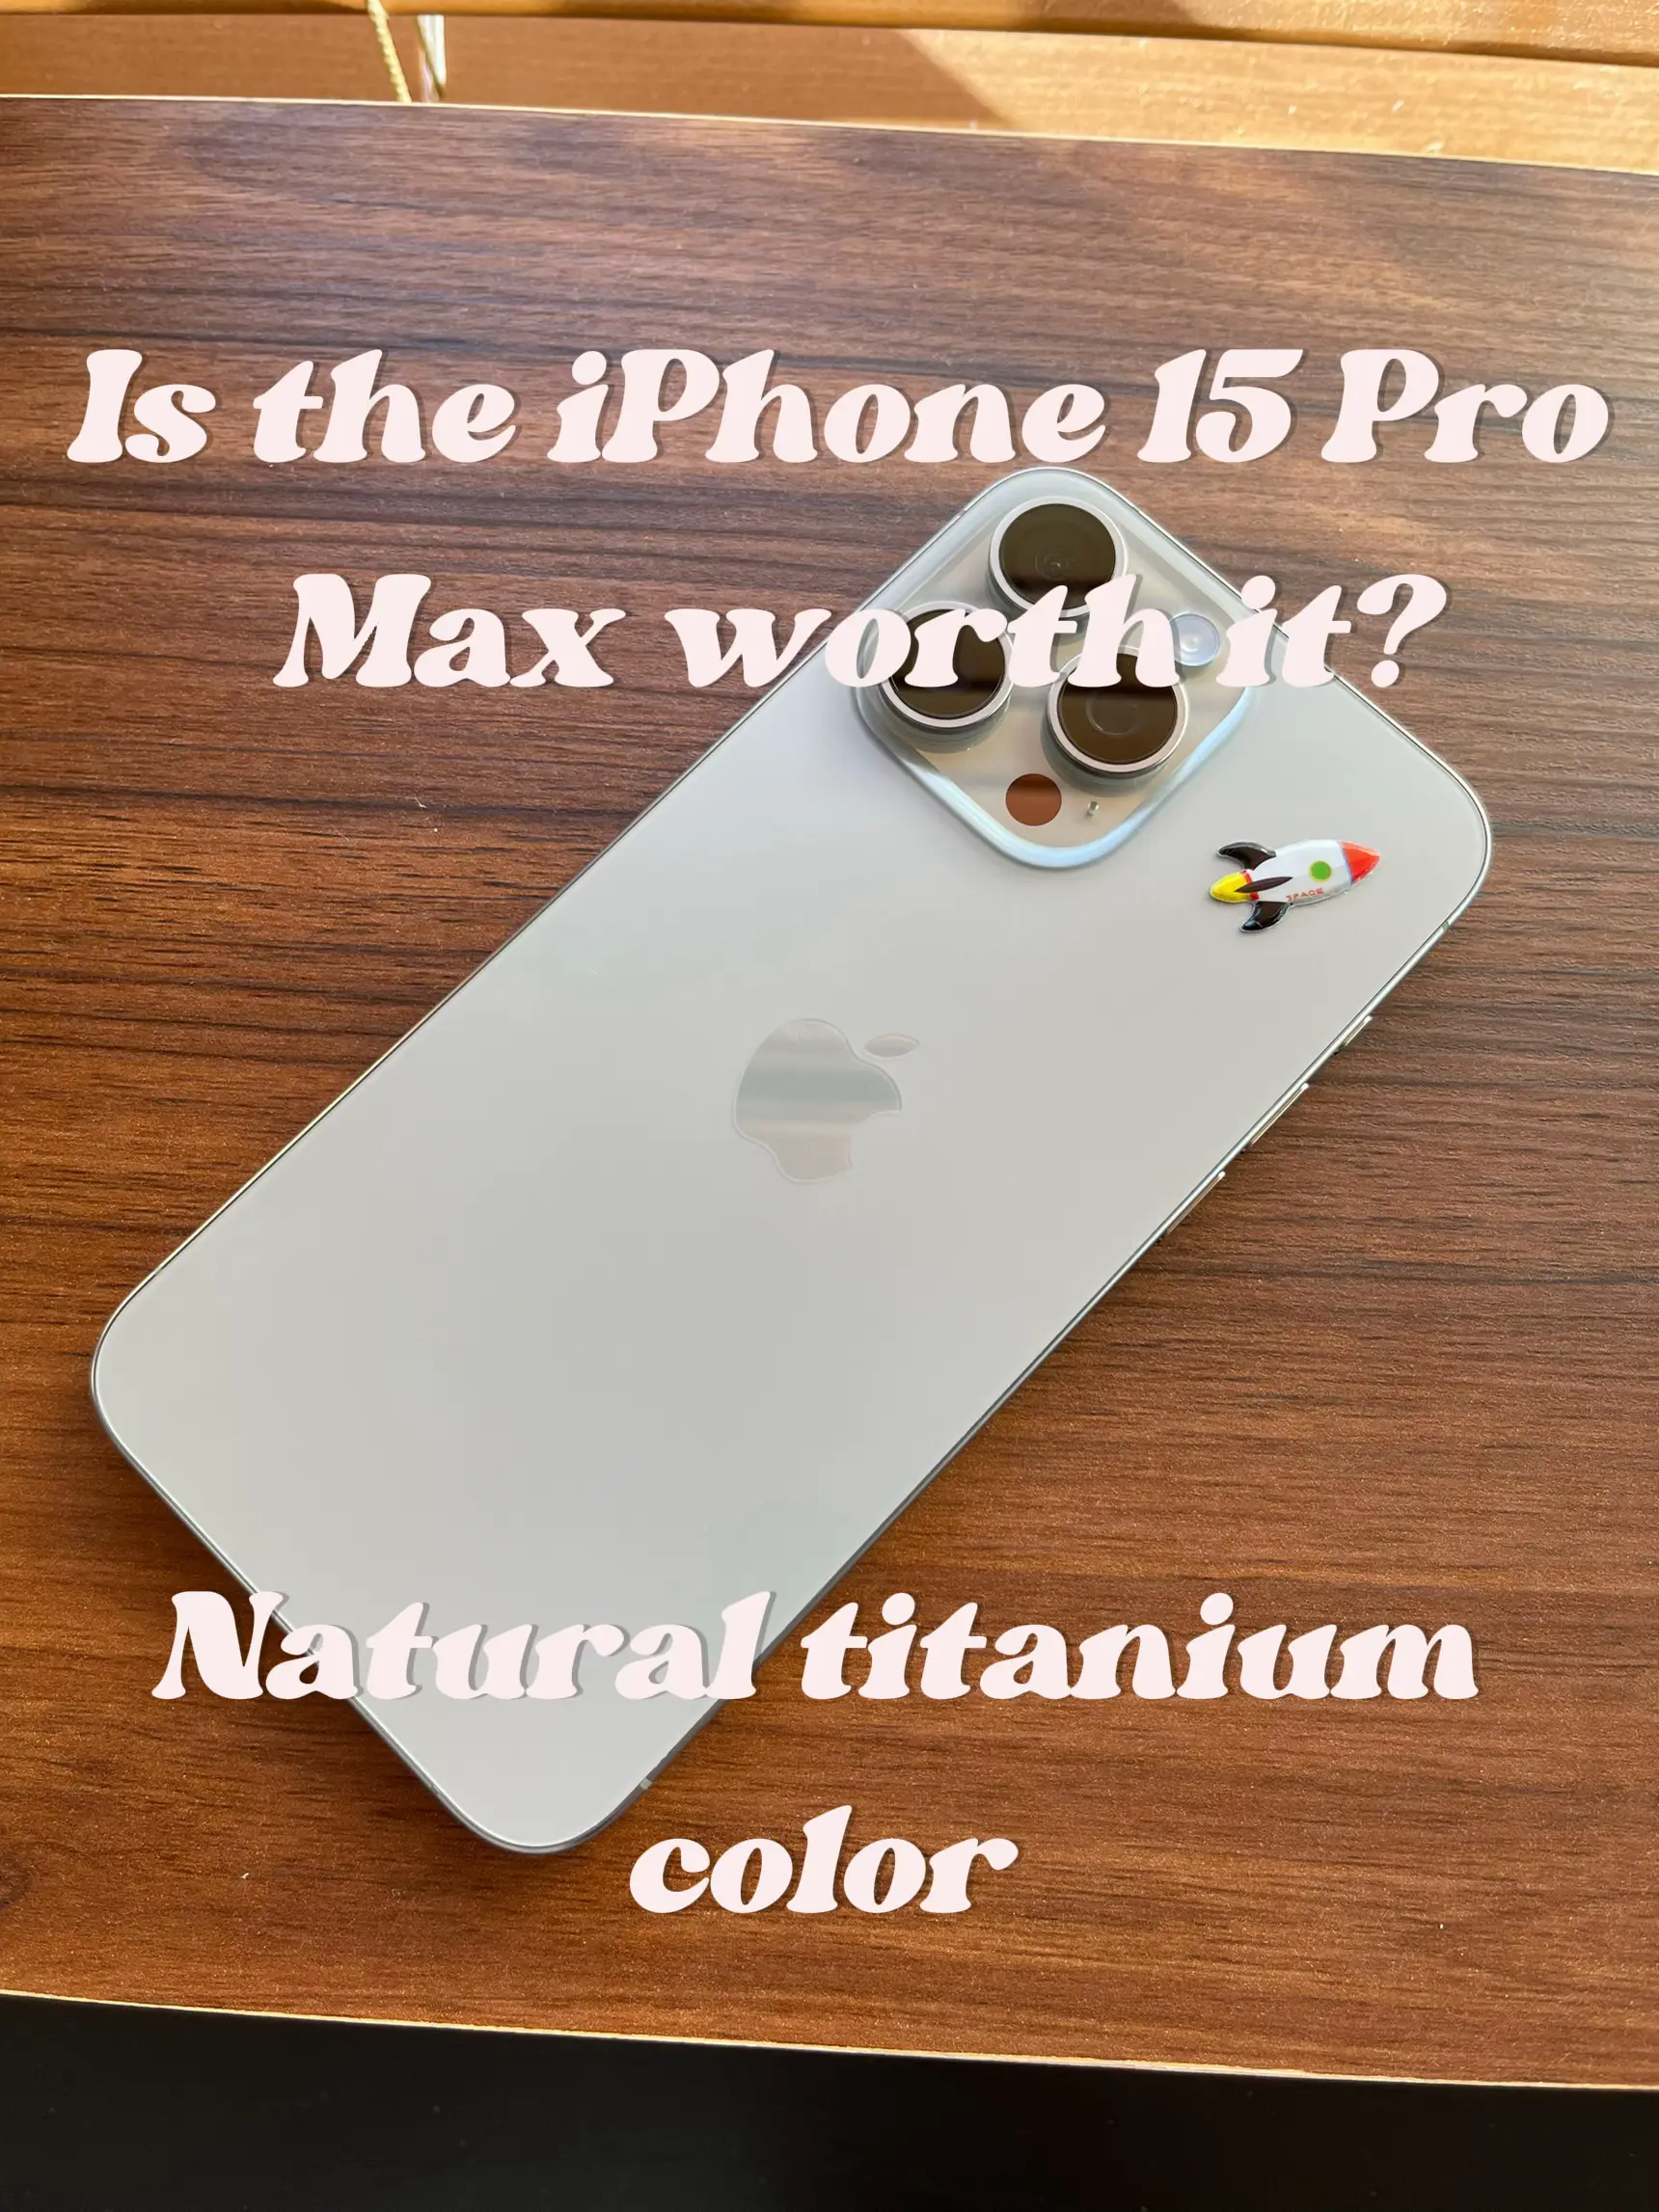 iPhone 15 Pro Max Unboxing!! So excited to unbox the latest iPhone!😭 , iphone  15 pro max